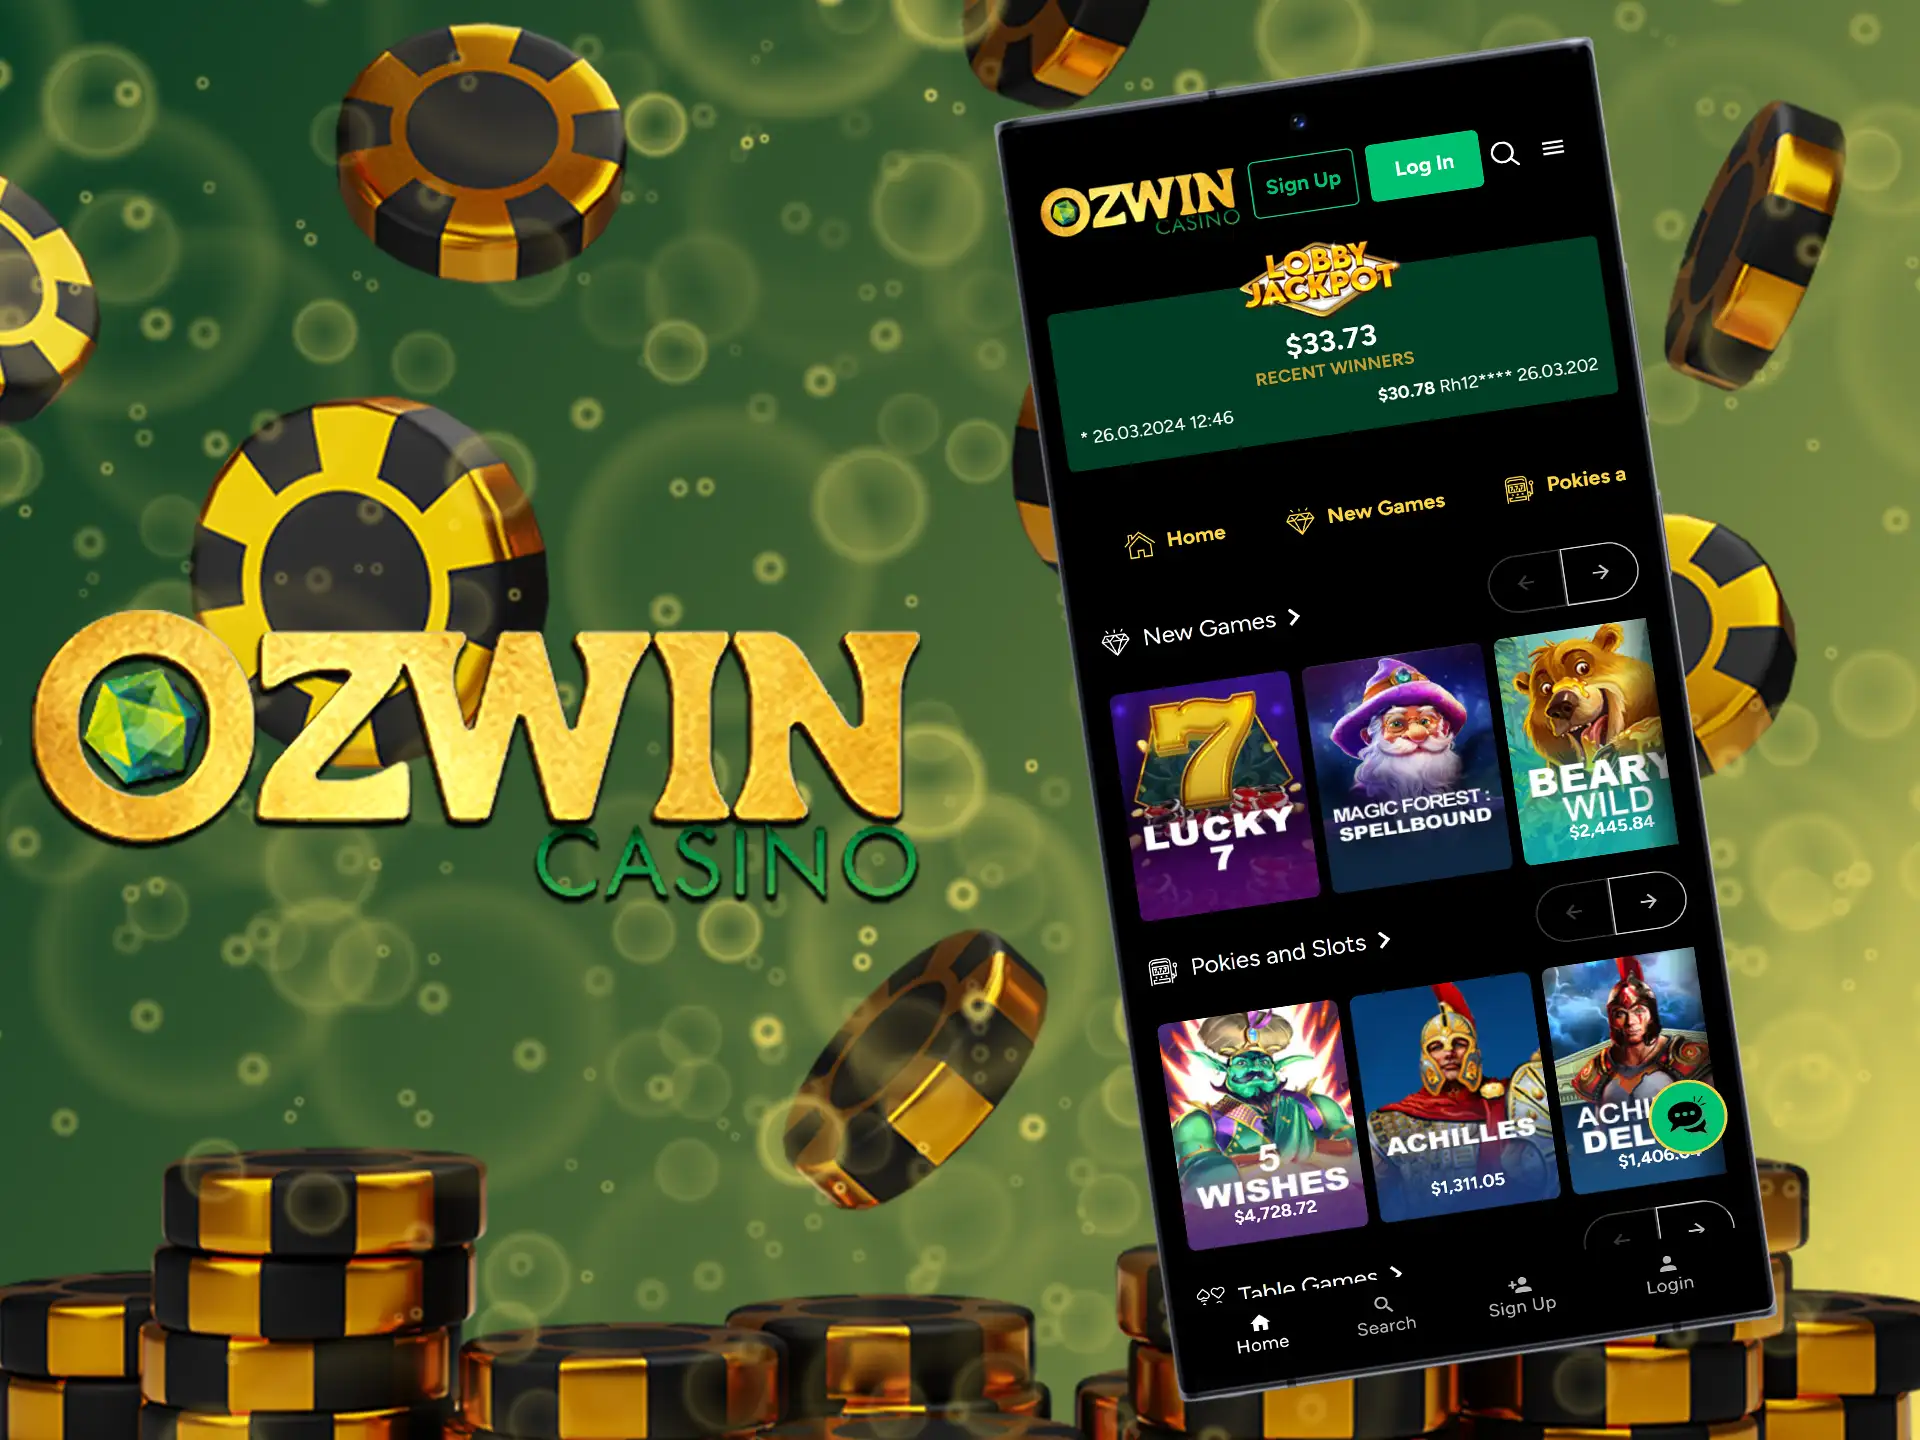 Ozwin provides an excellent alternative through its mobile website, eliminating the need for downloading app.